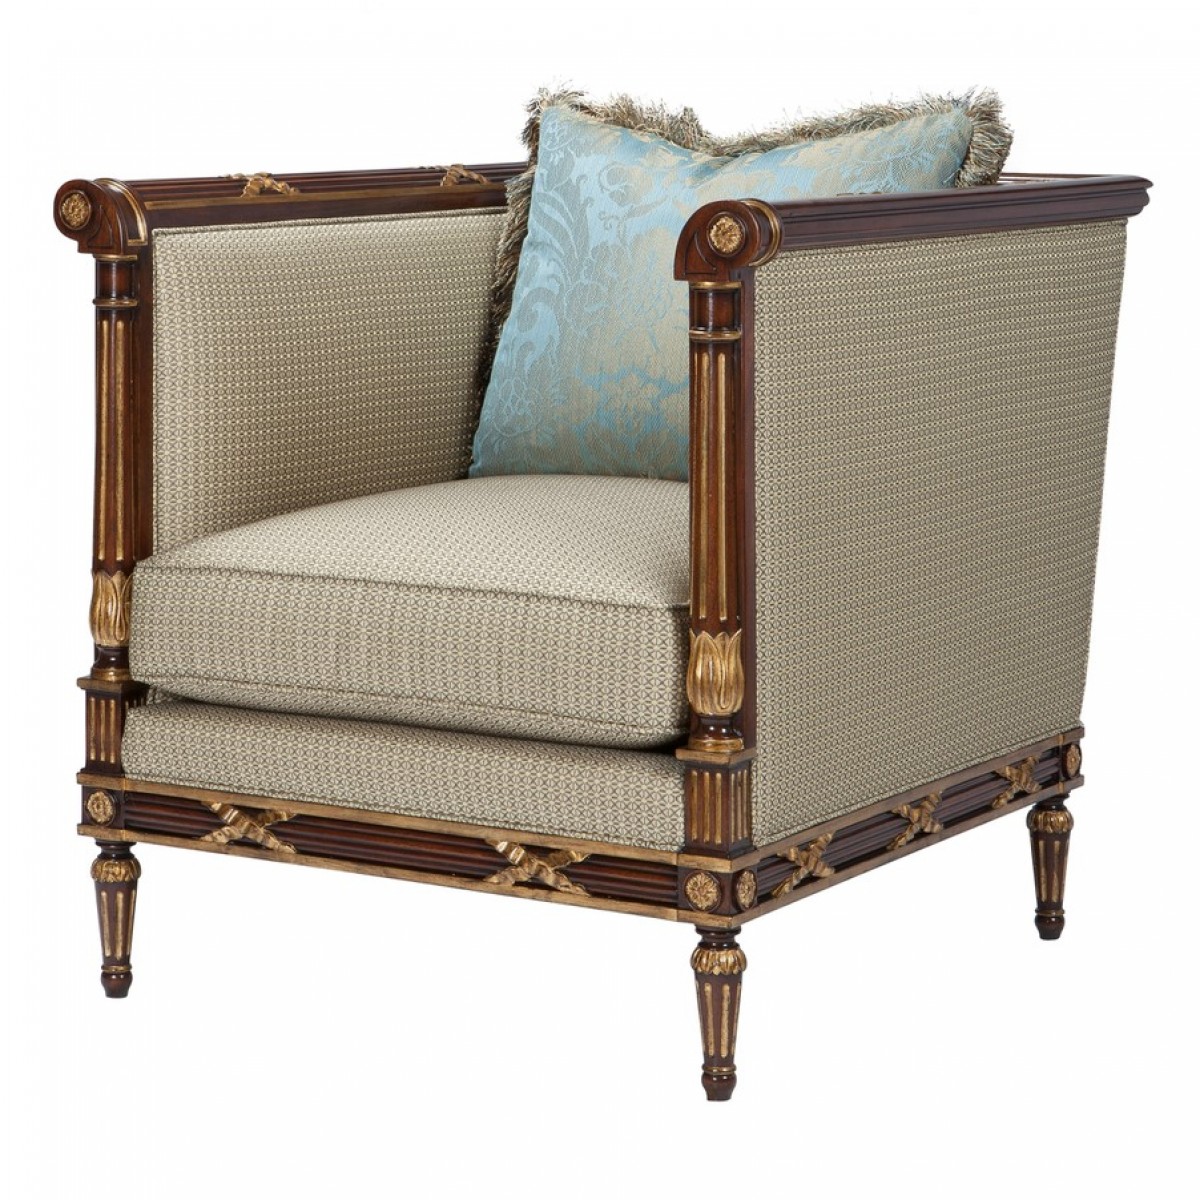 The Regent's Visit Upholstered Chair